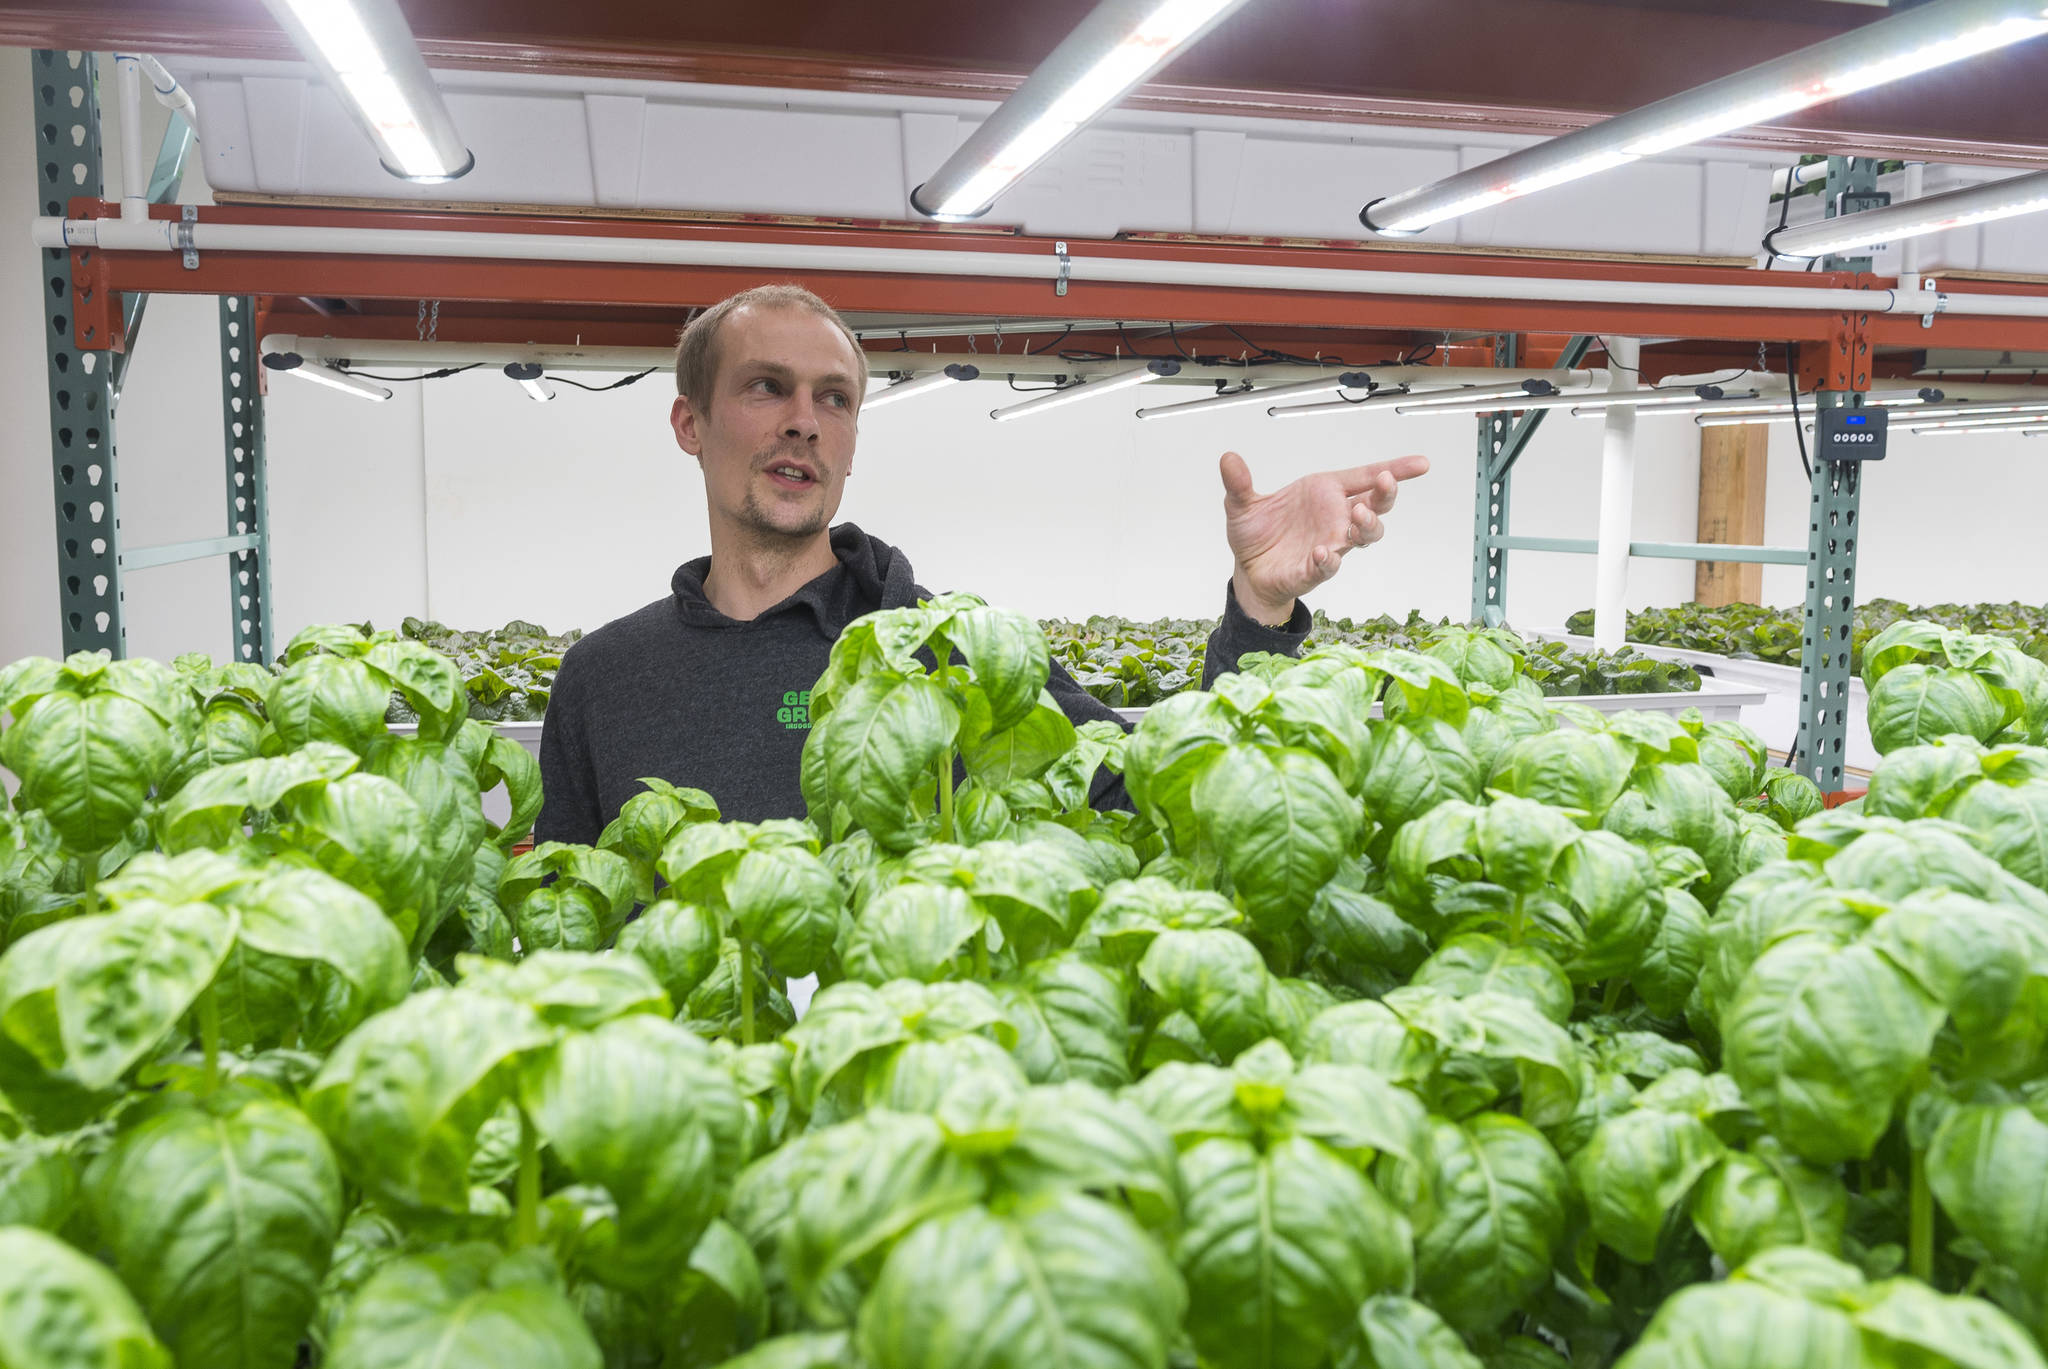 Trevor Kirchhoff, a co-owner of Juneau Greens, talks about their new indoor hydroponic growing system to produce basil and other leafy greens for sale in local grocery outlets on Wednesday, Oct. 25, 2017. (Michael Penn | Juneau Empire)